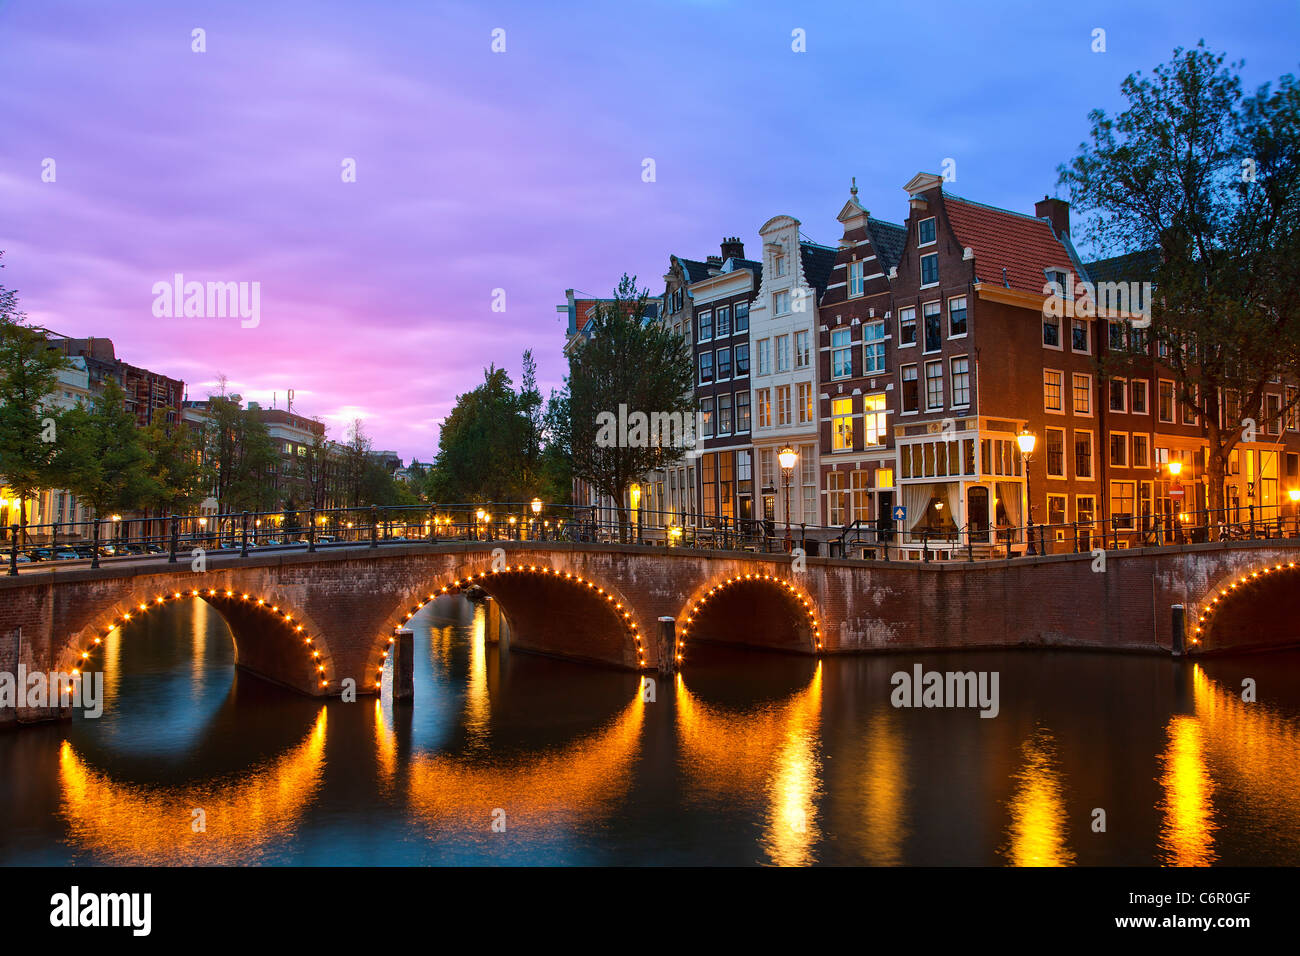 Europe, Netherlands, Keizersgracht Canal in Amsterdam at Dusk Stock Photo